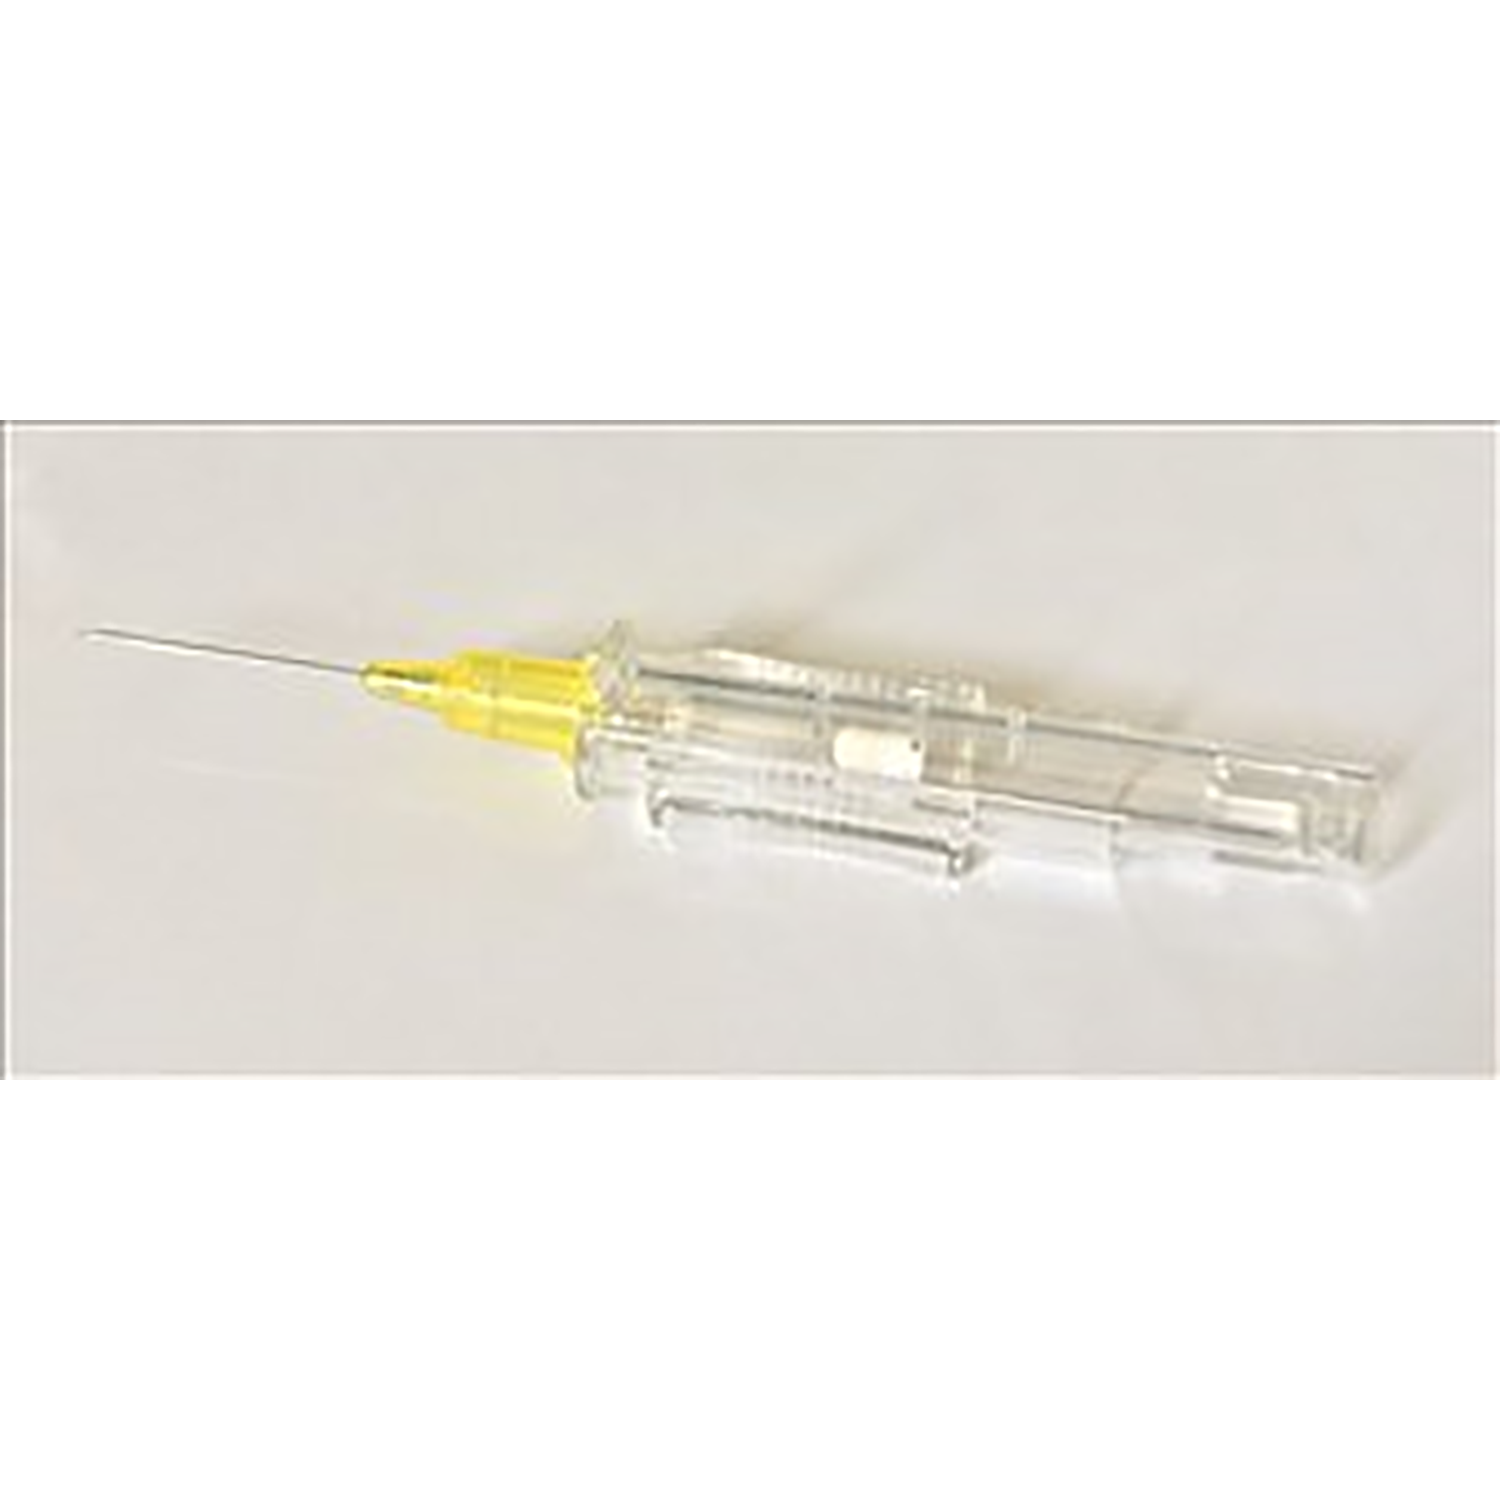 Safety Peripheral Intravenous Cannula | Non-winged Yellow 24G x 19mm | Techrilon PUR Radiopaque | Pack of 200